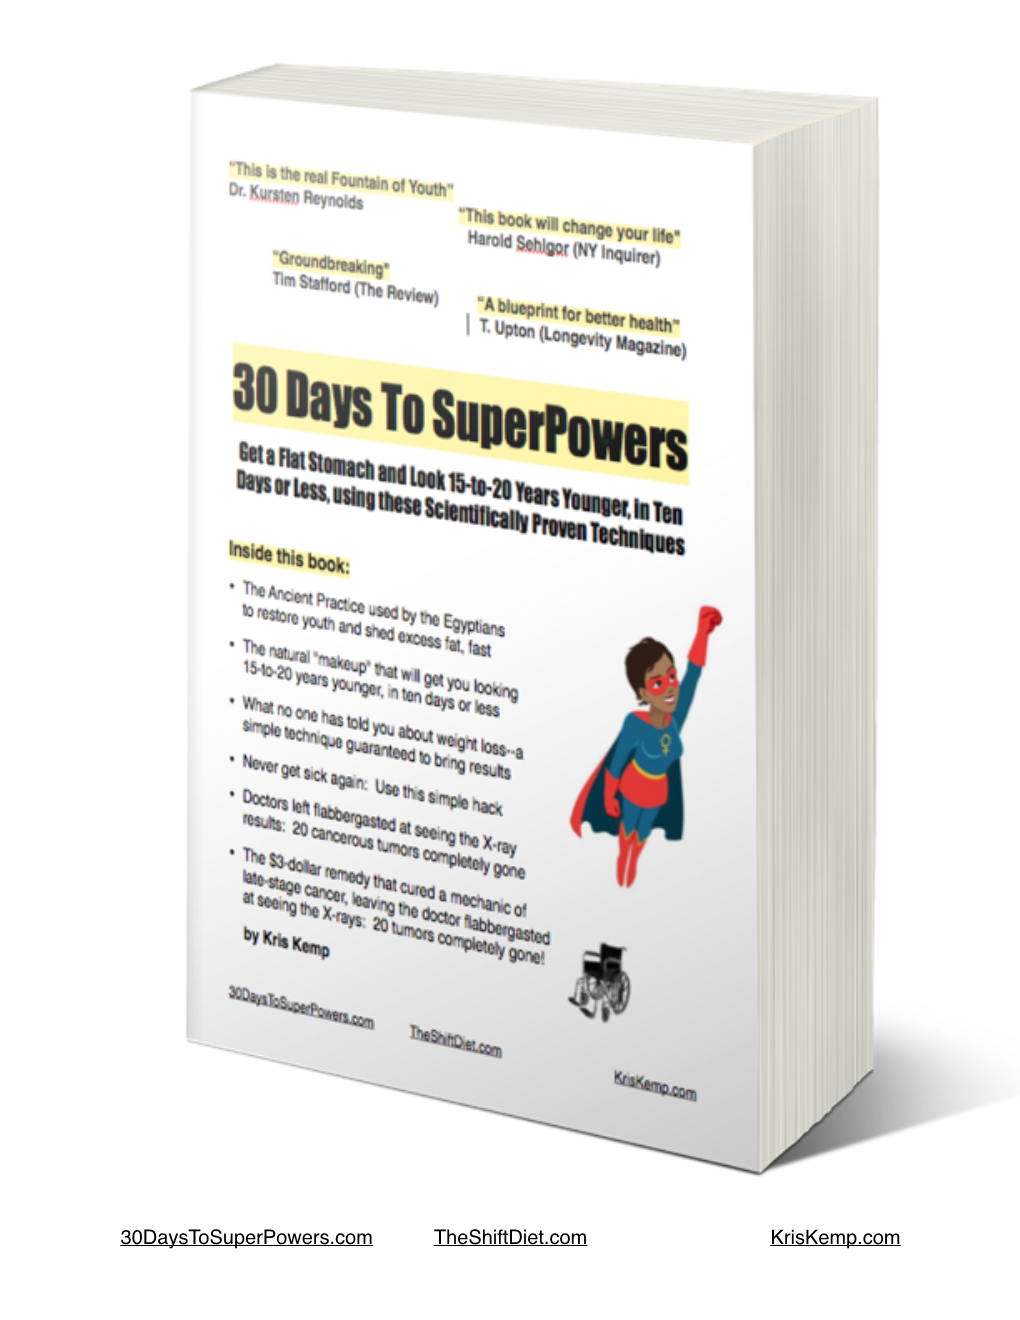 30 Days to Superpowers Get a Flat Stomach and Look 15-To-20 Years Younger, in Ten Days Or Less, Using These Scientifically Proven Techniques